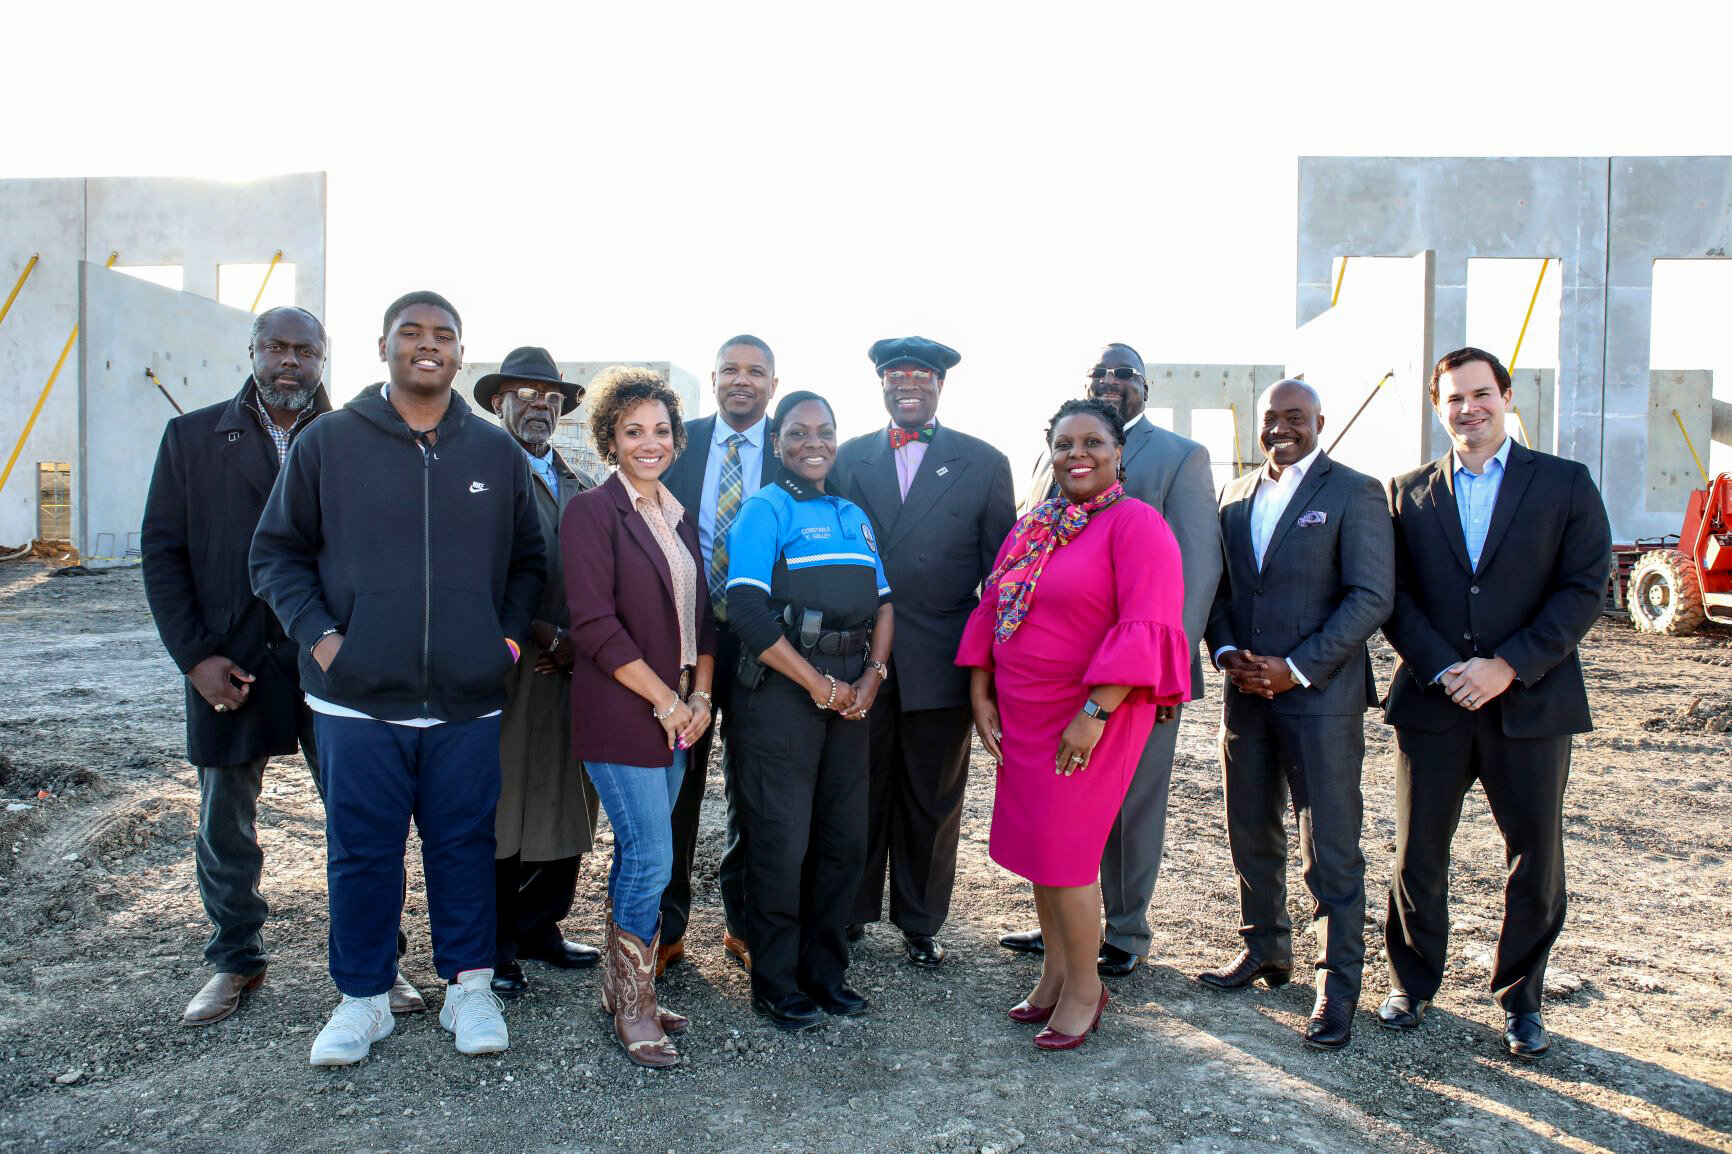 Kimberly Shaw, in cowboy boots, with the RBCA team and partners at the ground breaking of the new South Dallas County Government Center in 2019.